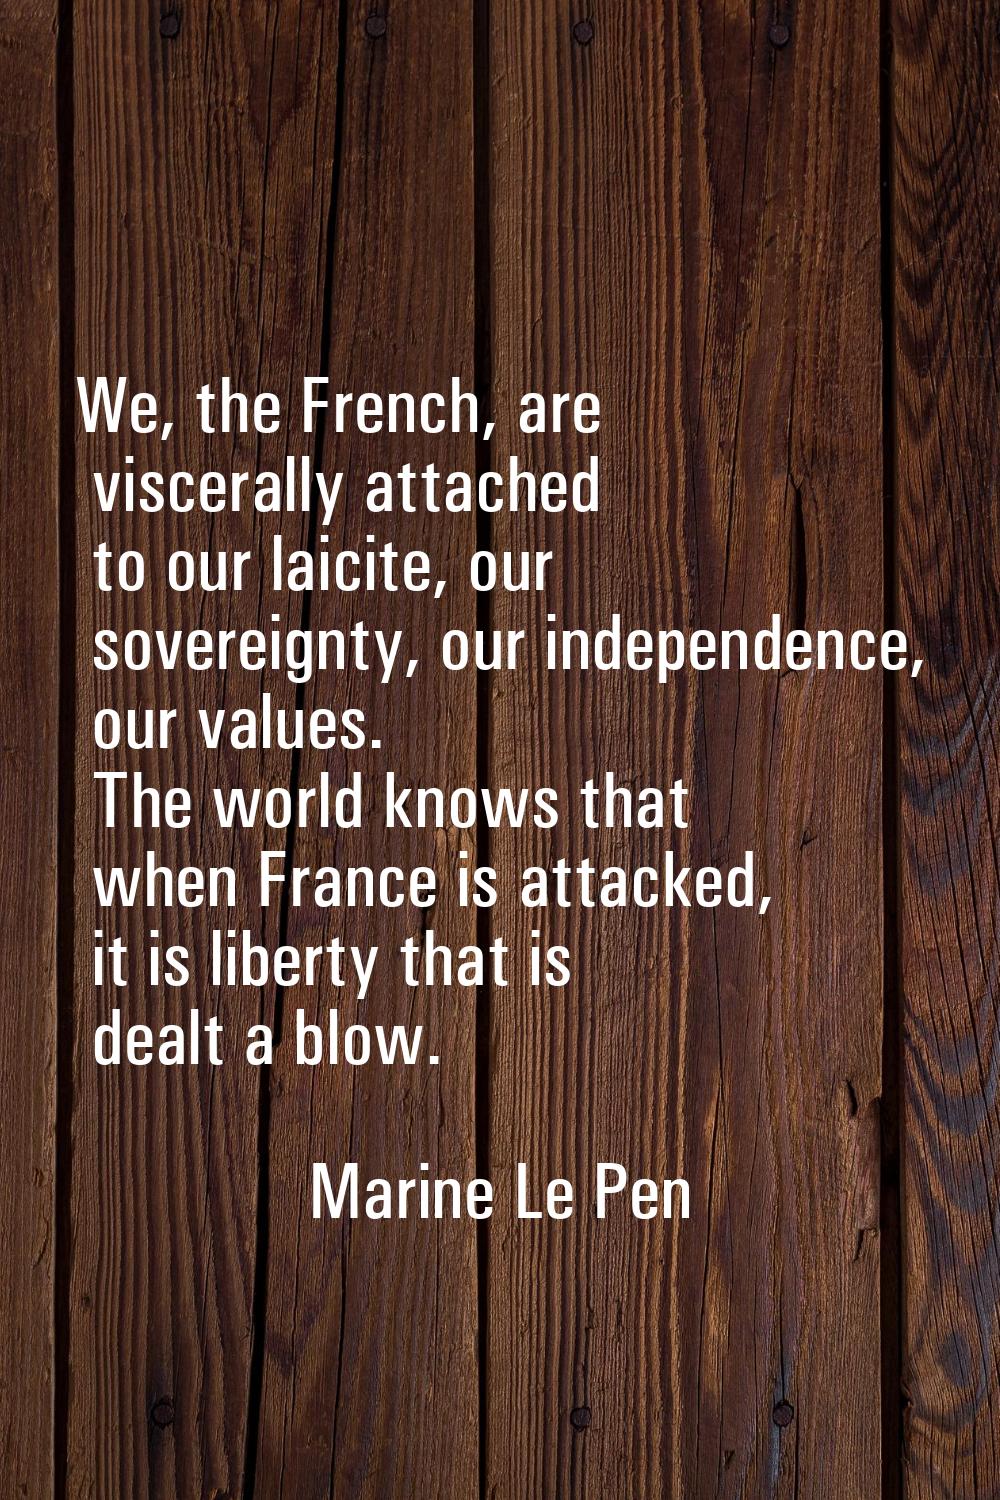 We, the French, are viscerally attached to our laicite, our sovereignty, our independence, our valu